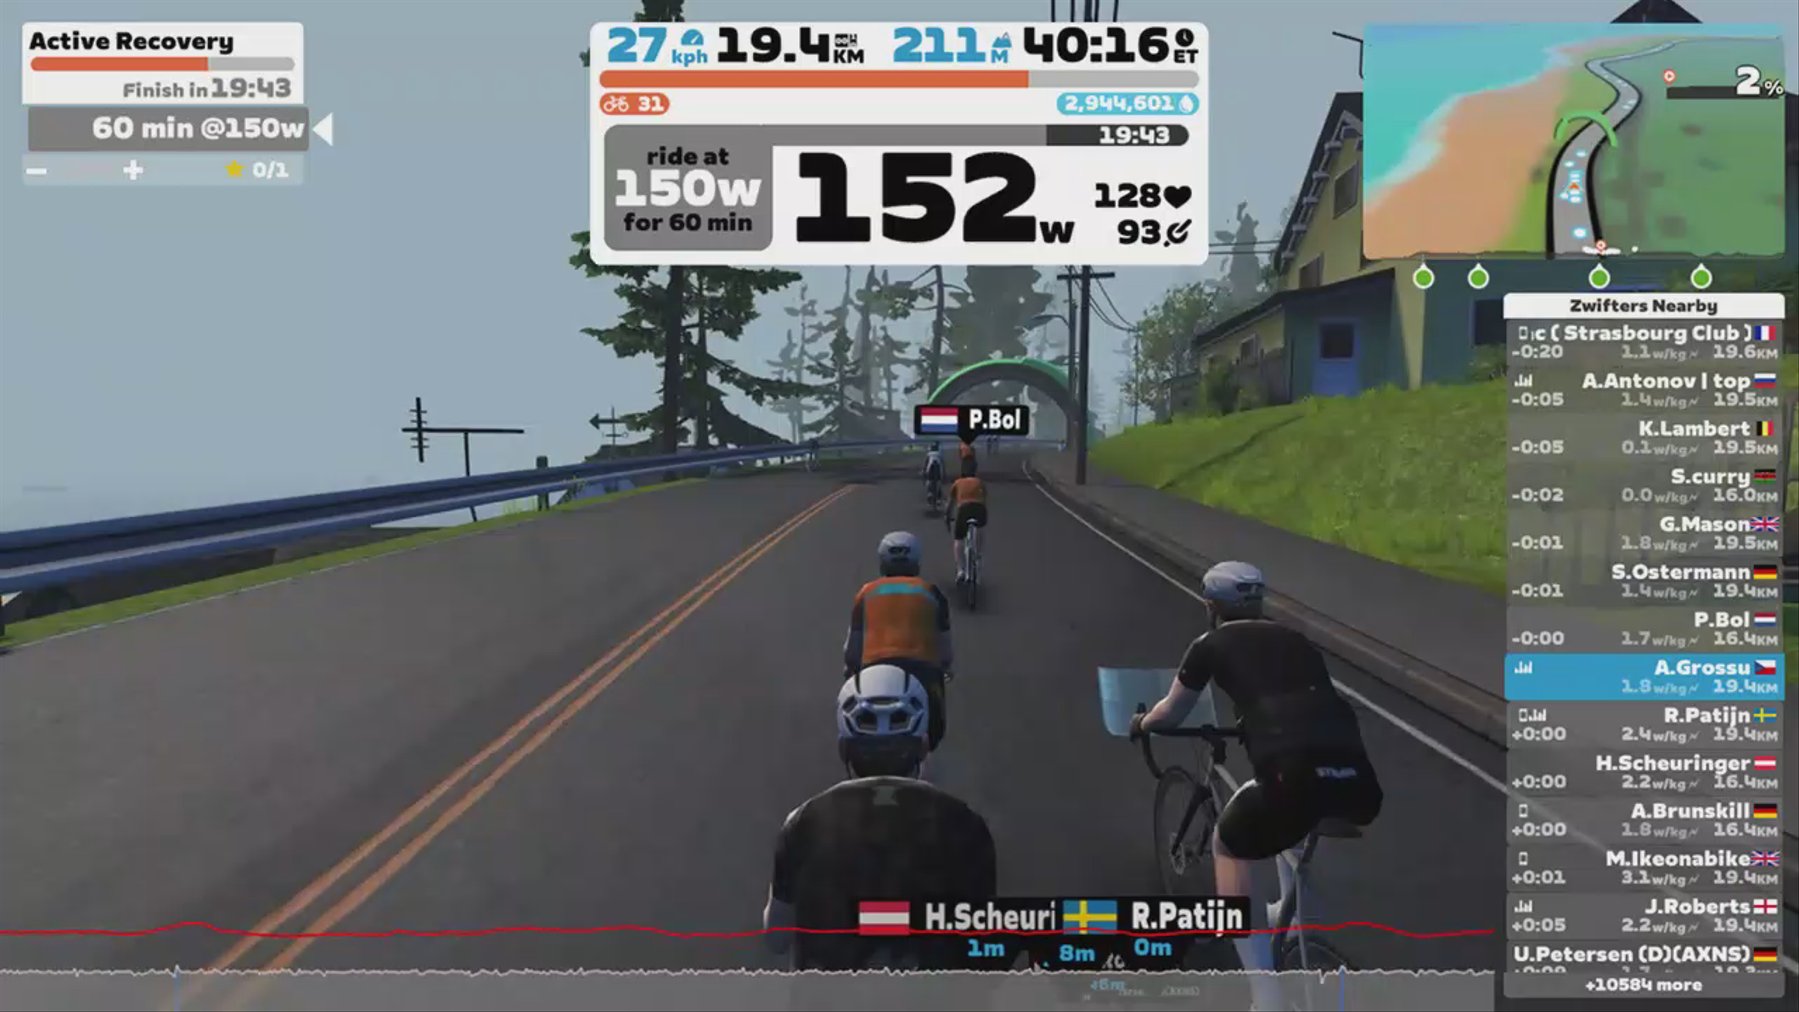 Zwift - Active Recovery in Watopia